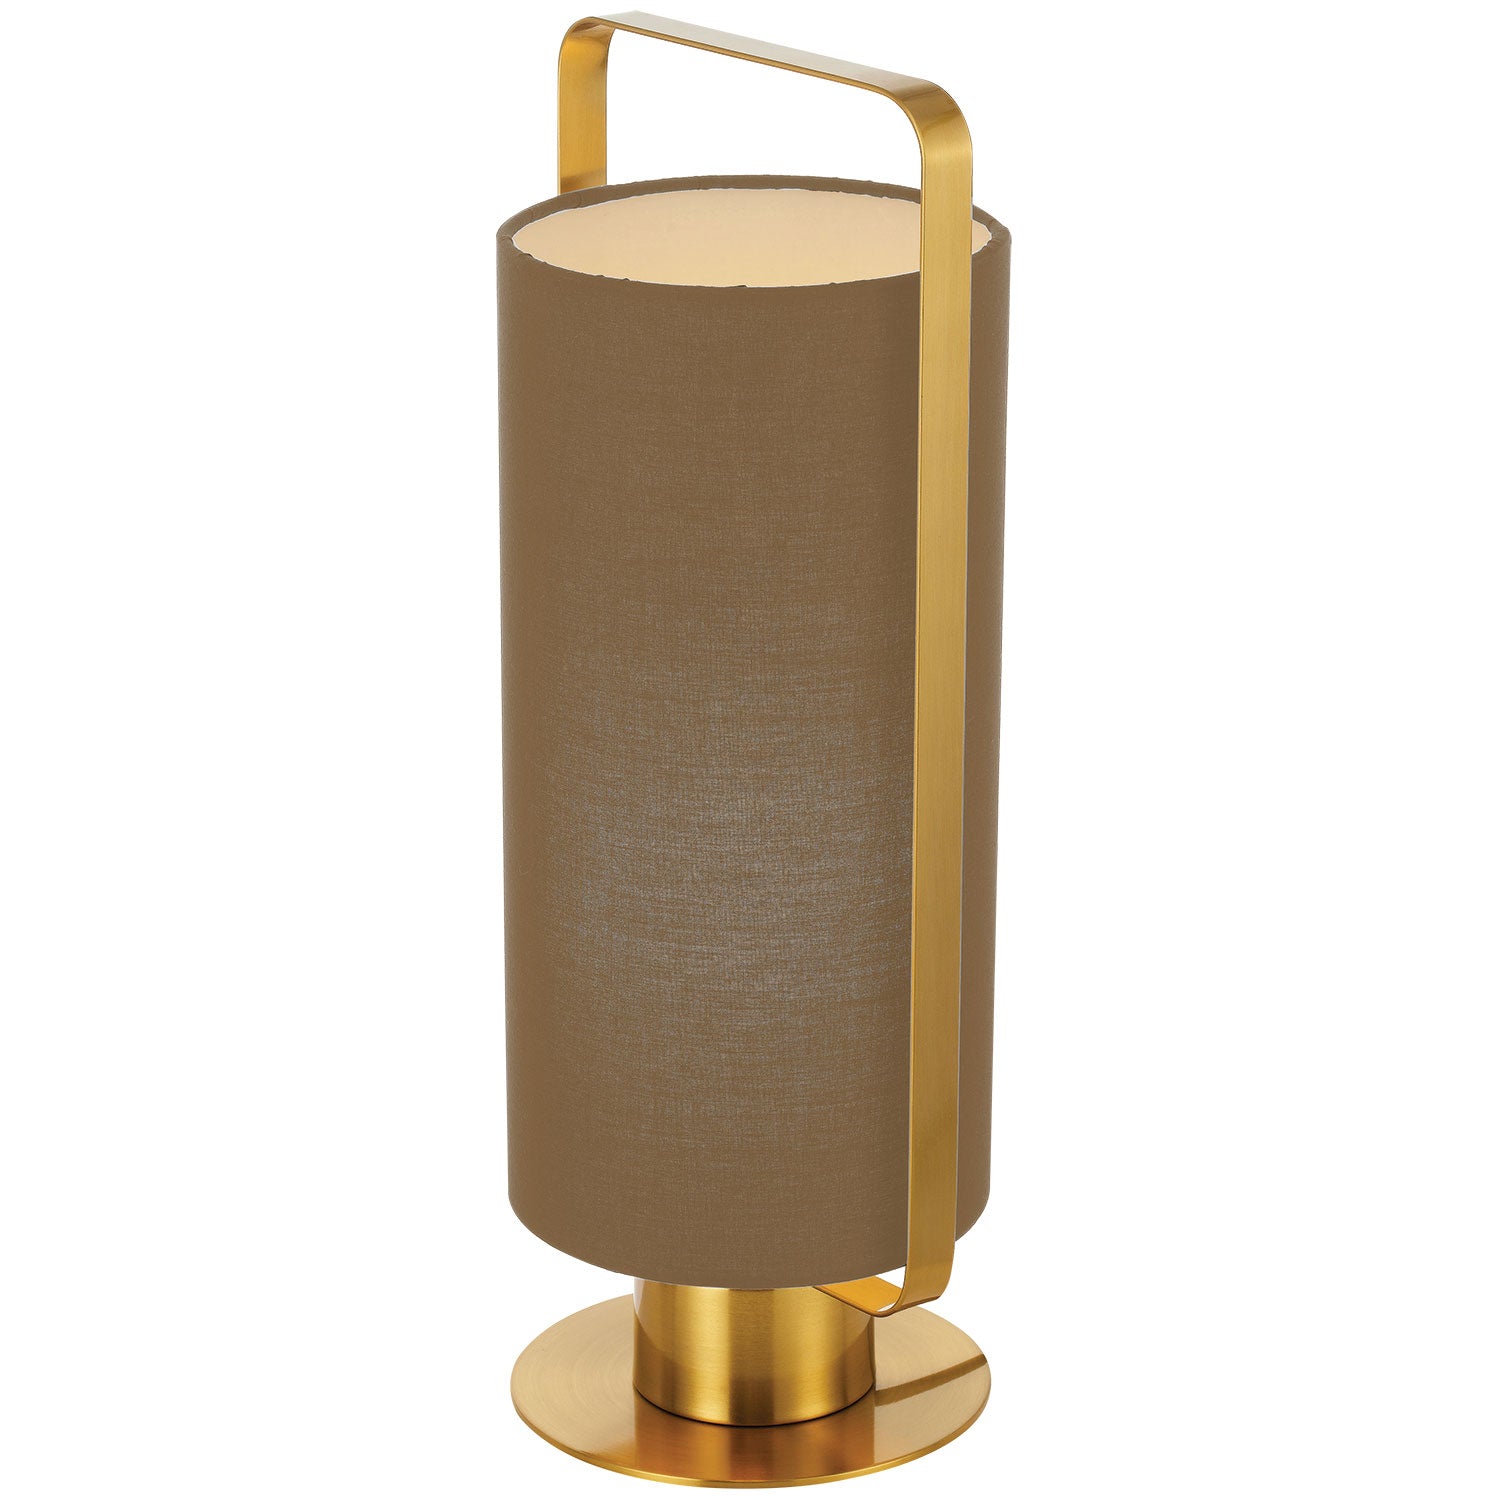 Orwel Mocha and Antique Gold Modern Table Lamp